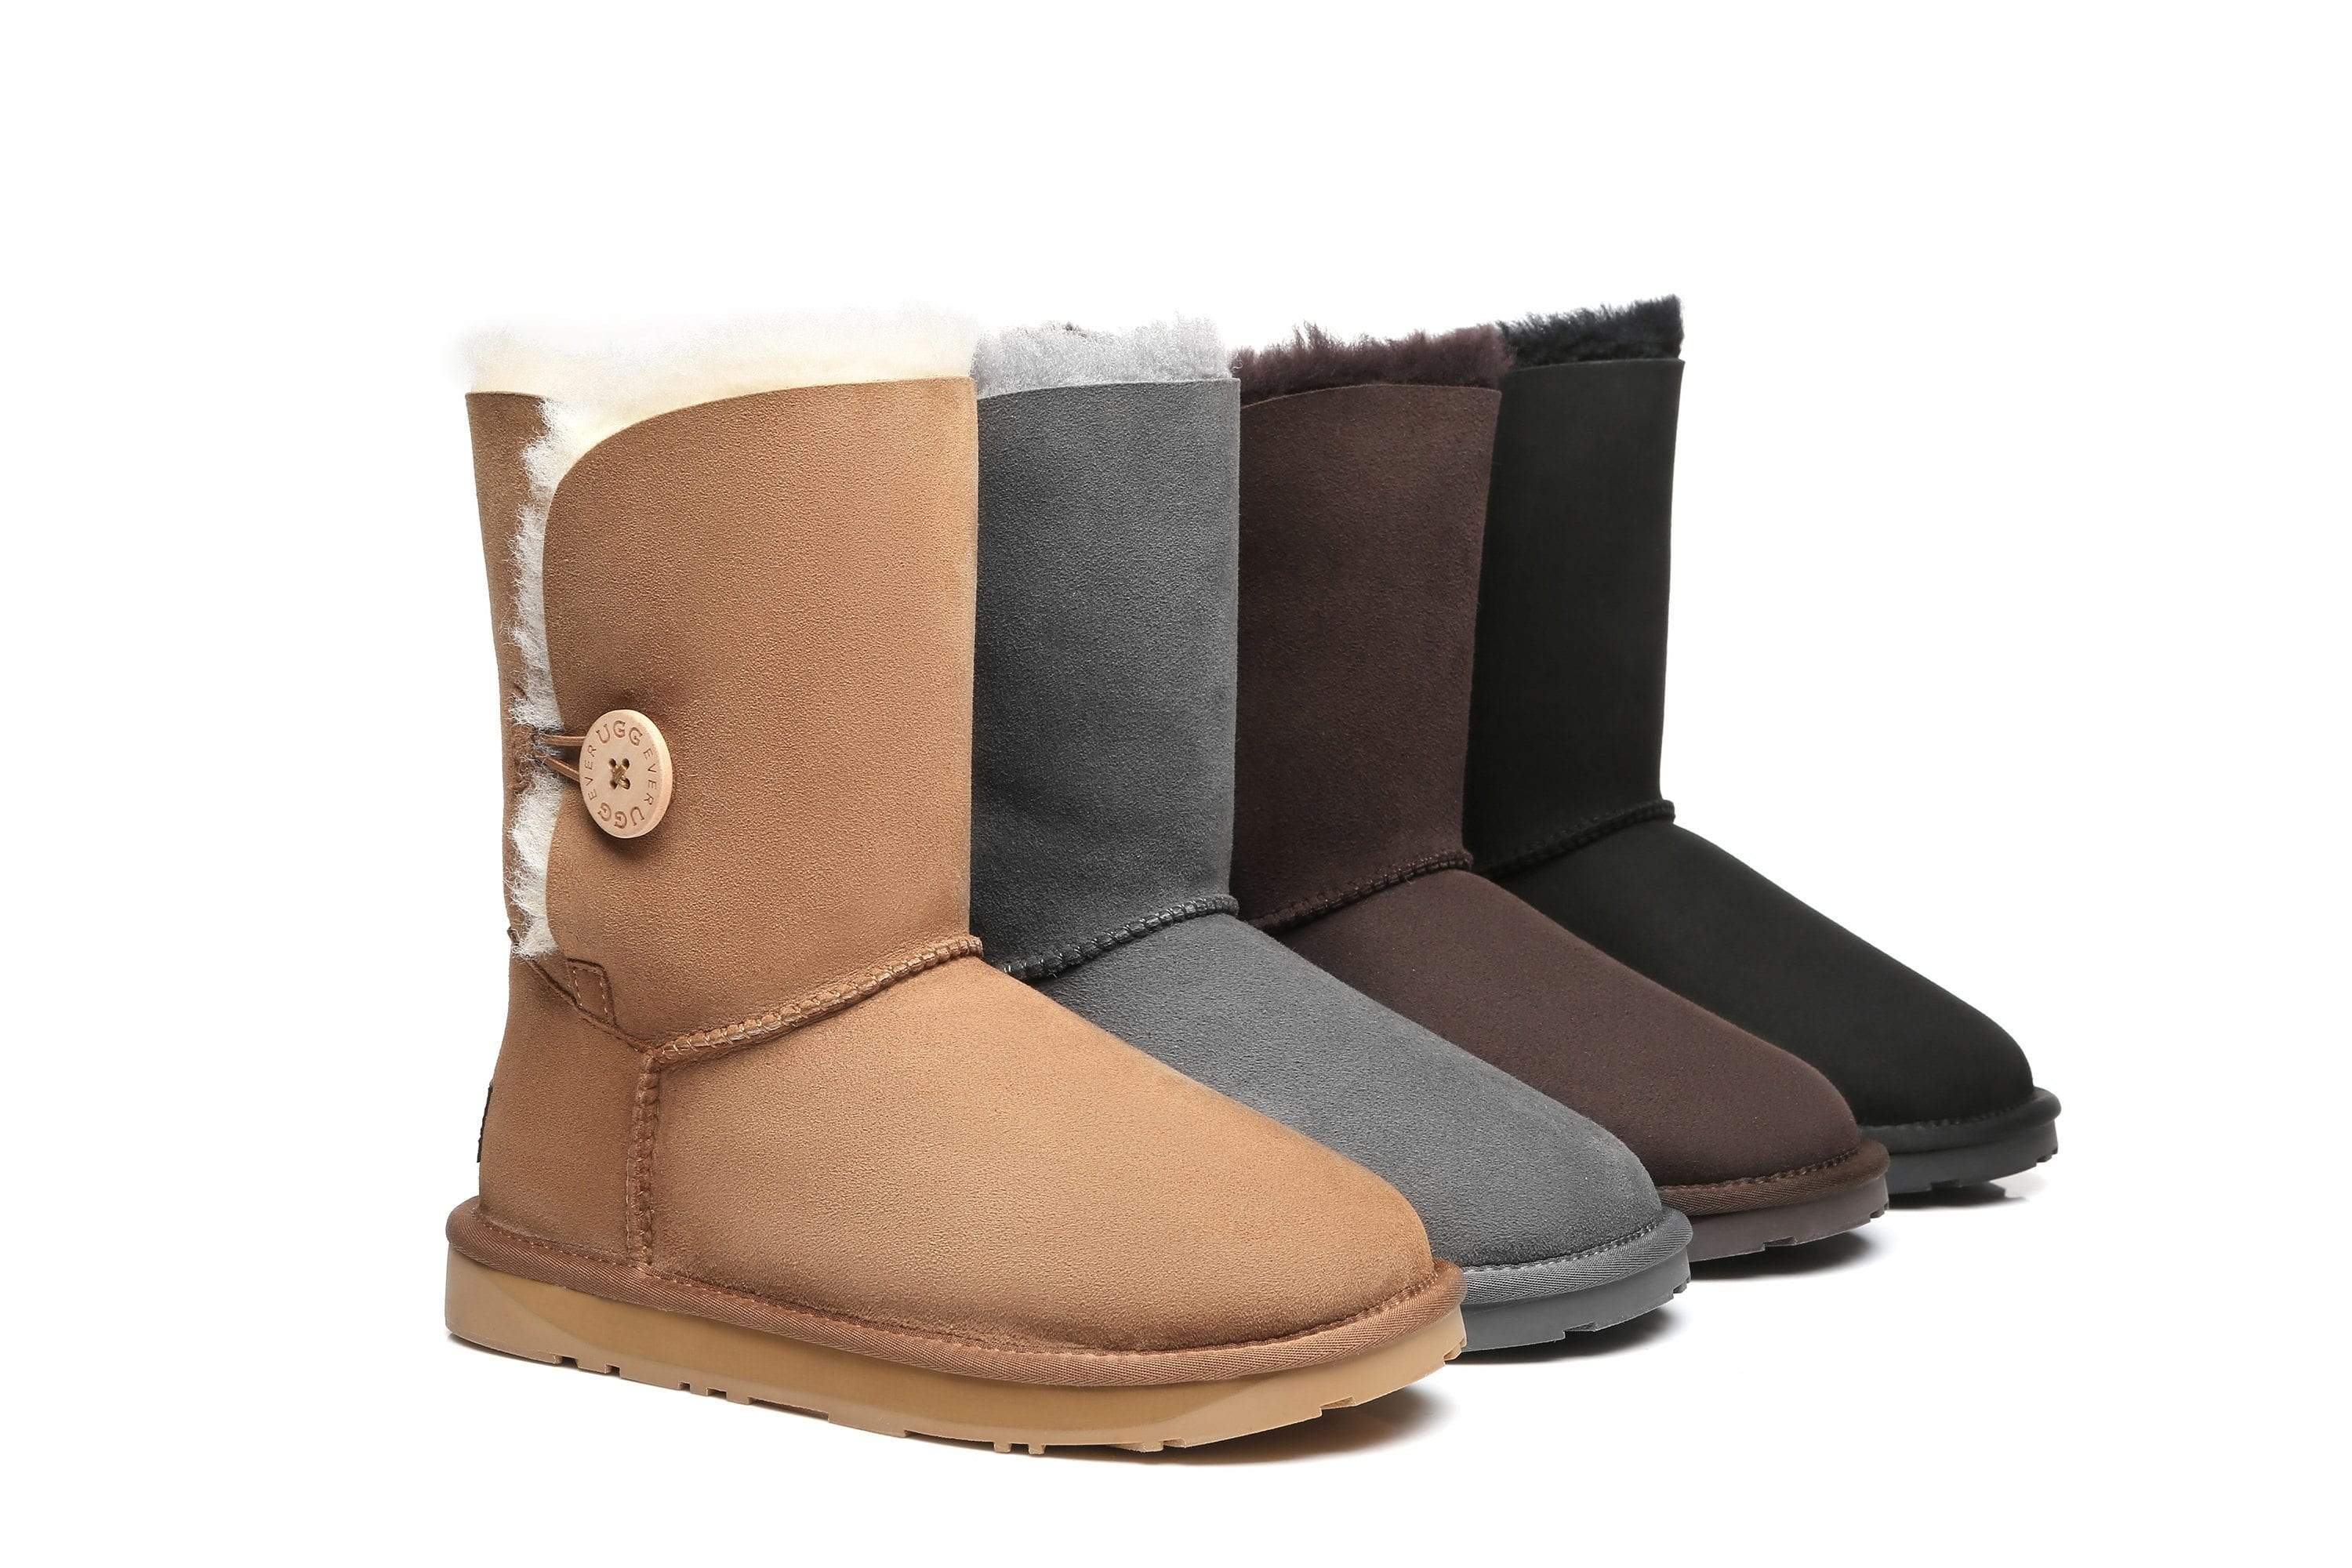 ugg water resistant boots